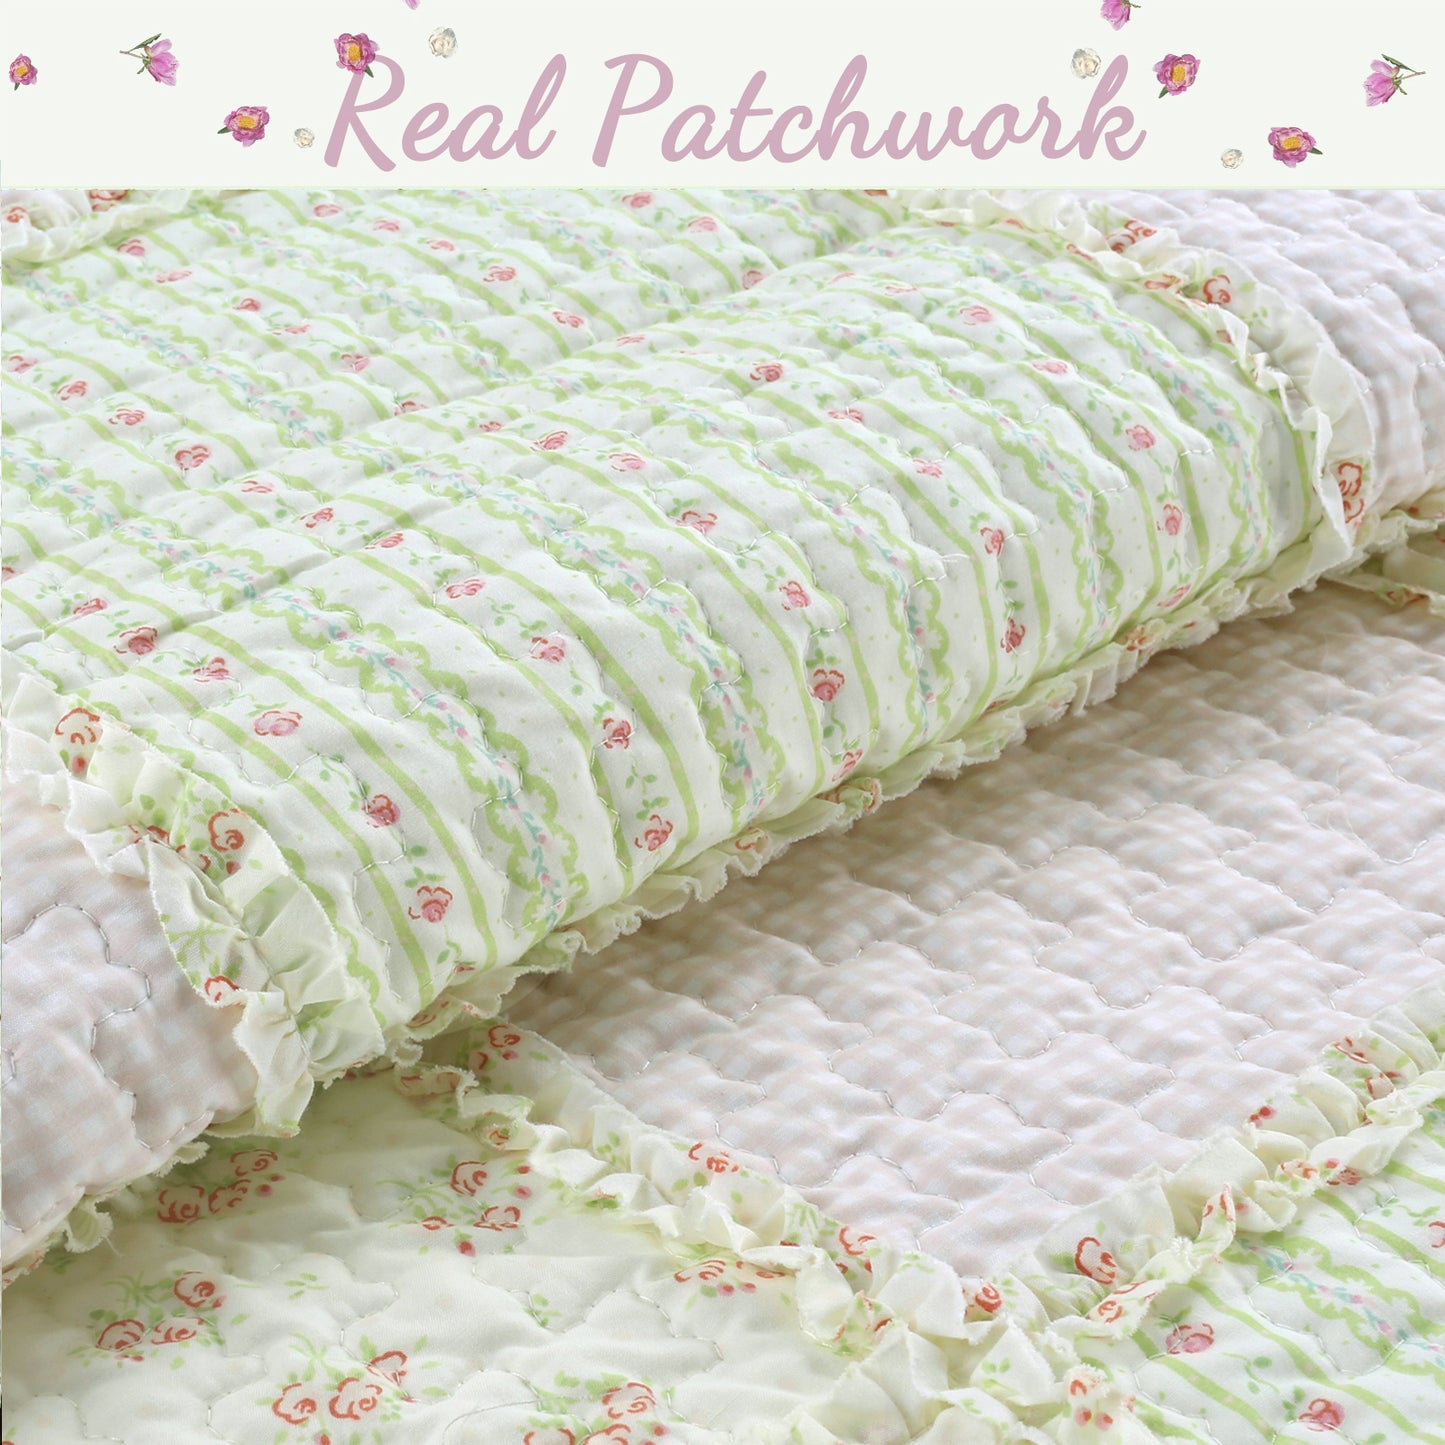 Sweet Peach Pink Floral Ruffle Scalloped Real Patchwork Cotton Reversible Quilt Bedding Set